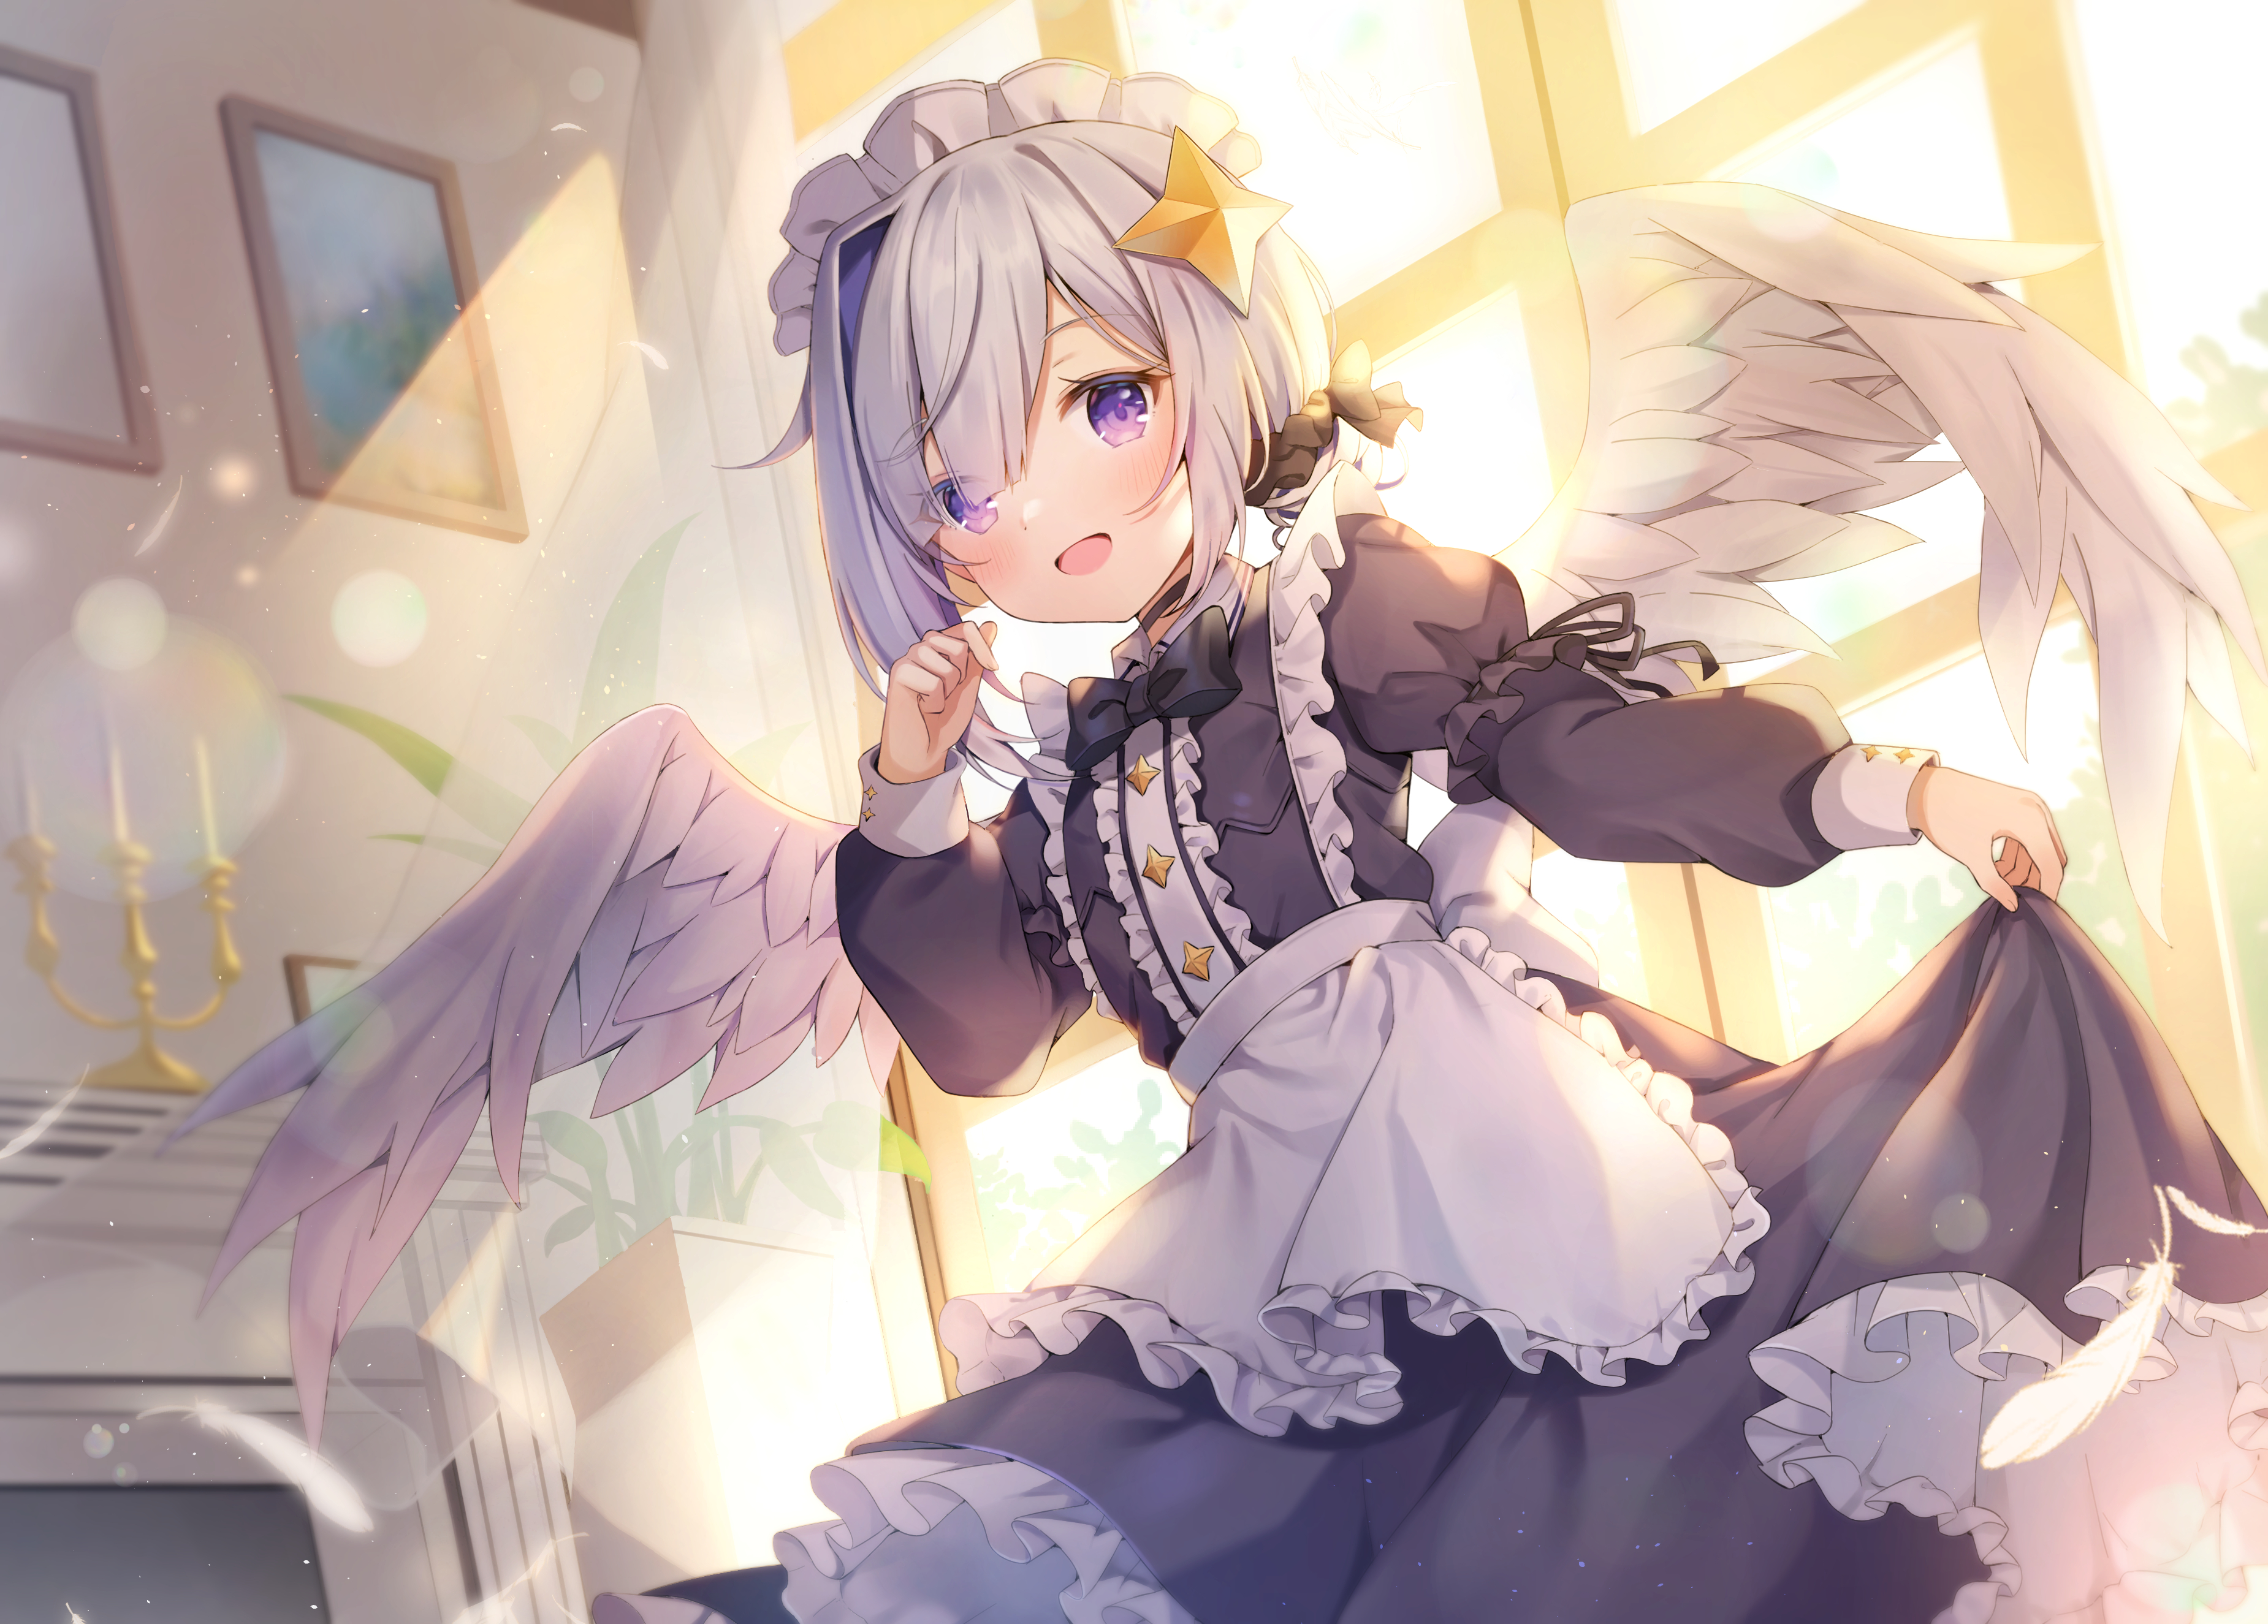 Anime Anime Girls Hololive Virtual Youtuber Amane Kanata Wings Silver Hair Purple Eyes Maid Outfit 3700x2650